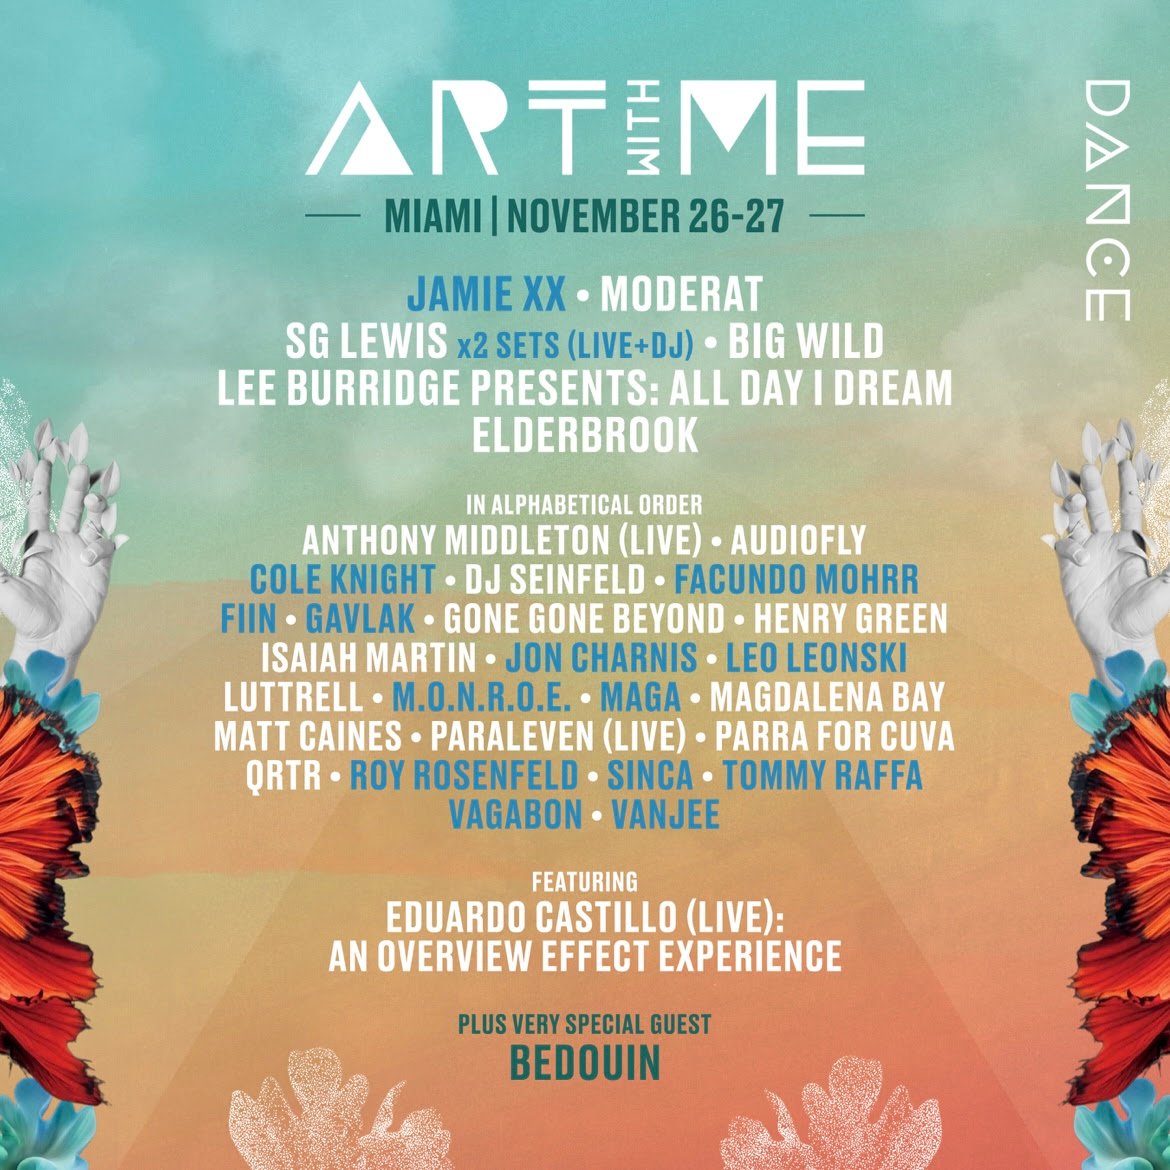 Feel The Pulse Of Miami’s Music, Art & Culture Scene At Art With Me Festival